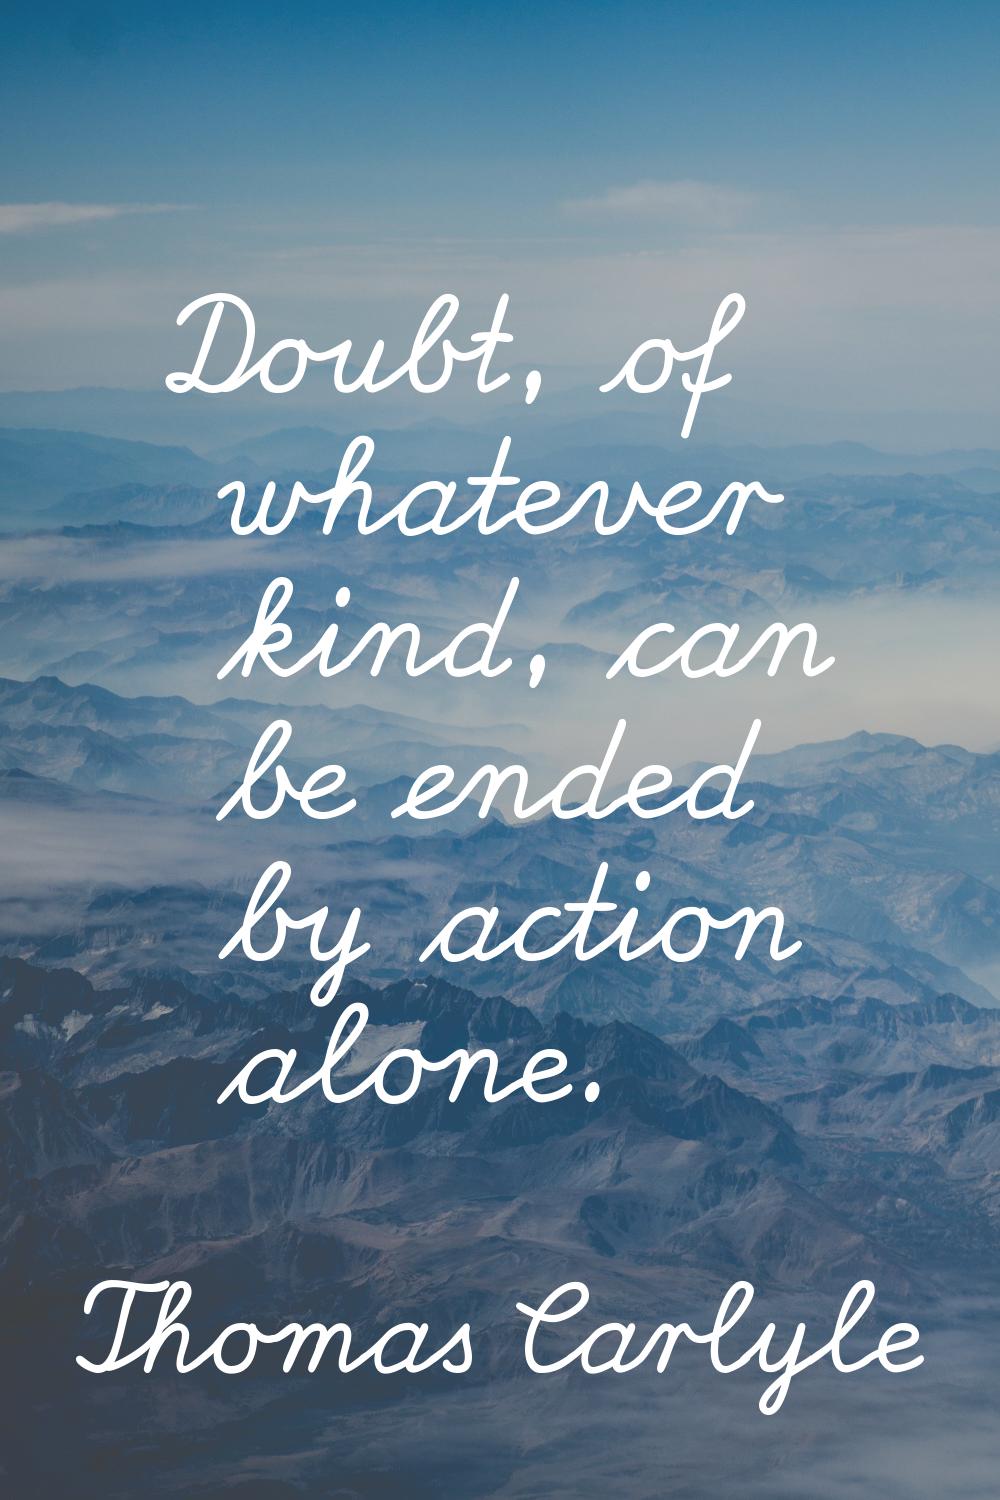 Doubt, of whatever kind, can be ended by action alone.